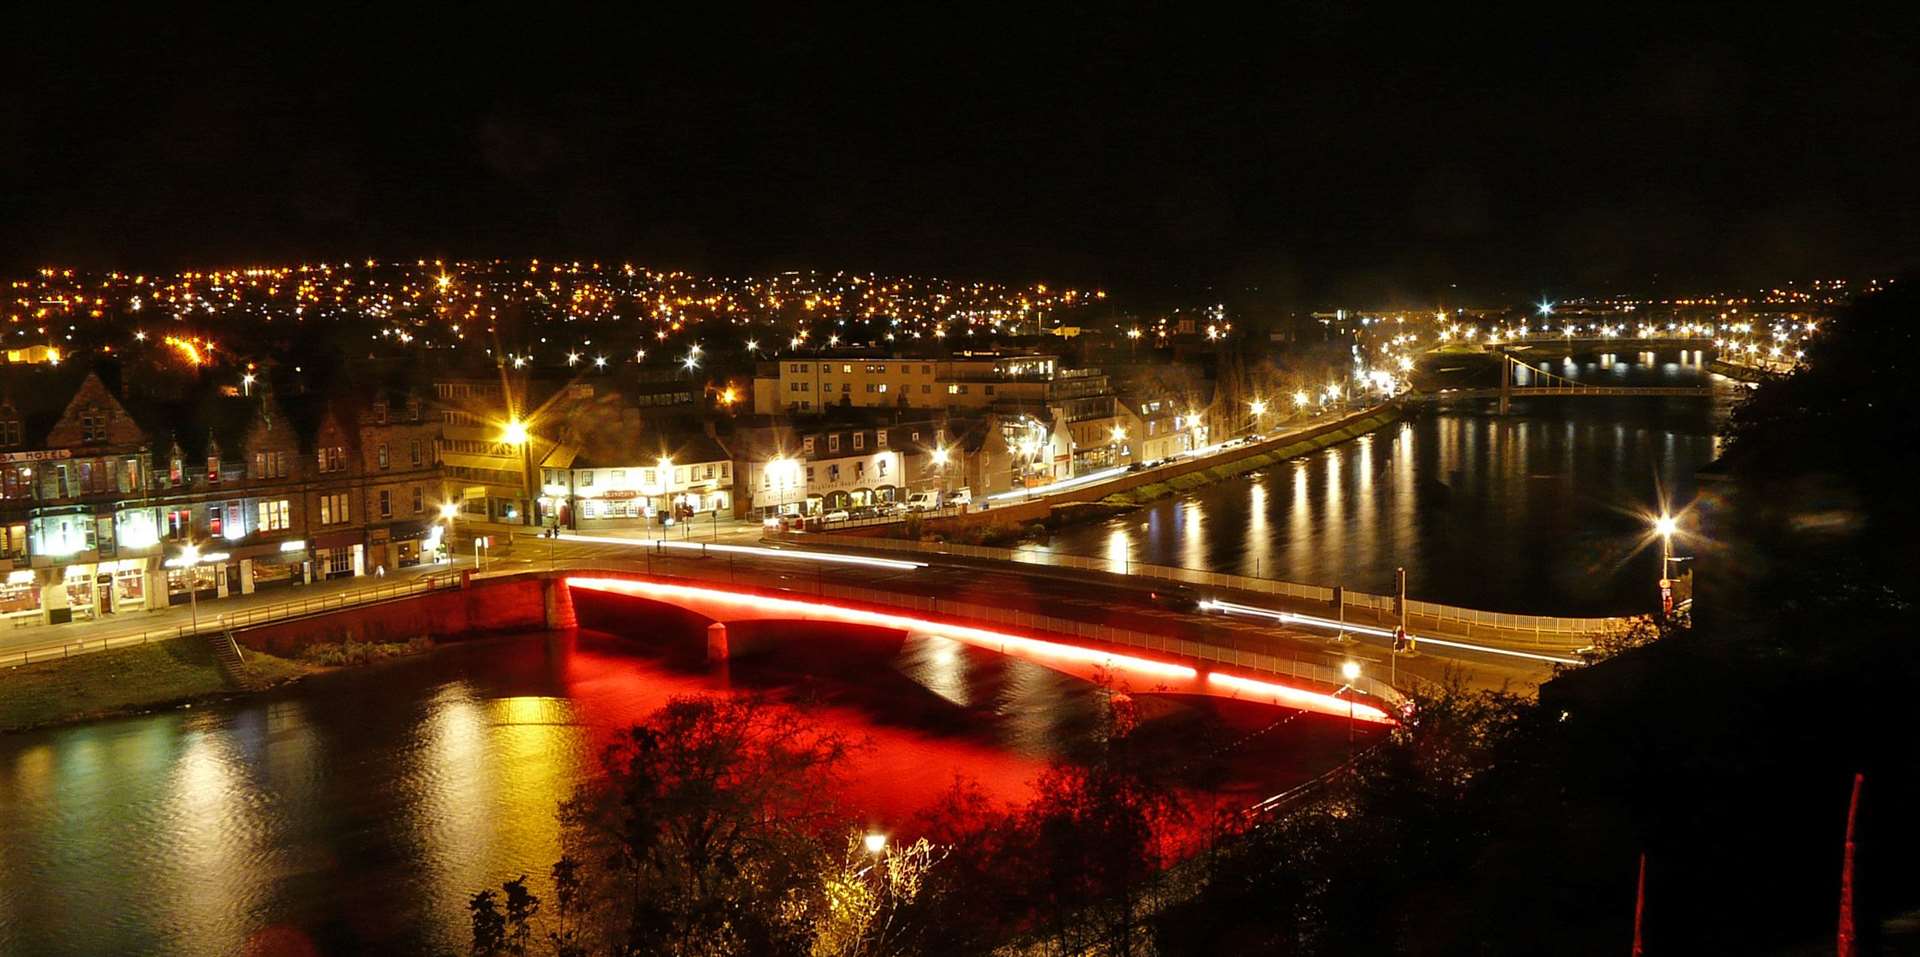 Ness bridge lit up for the remembrance.